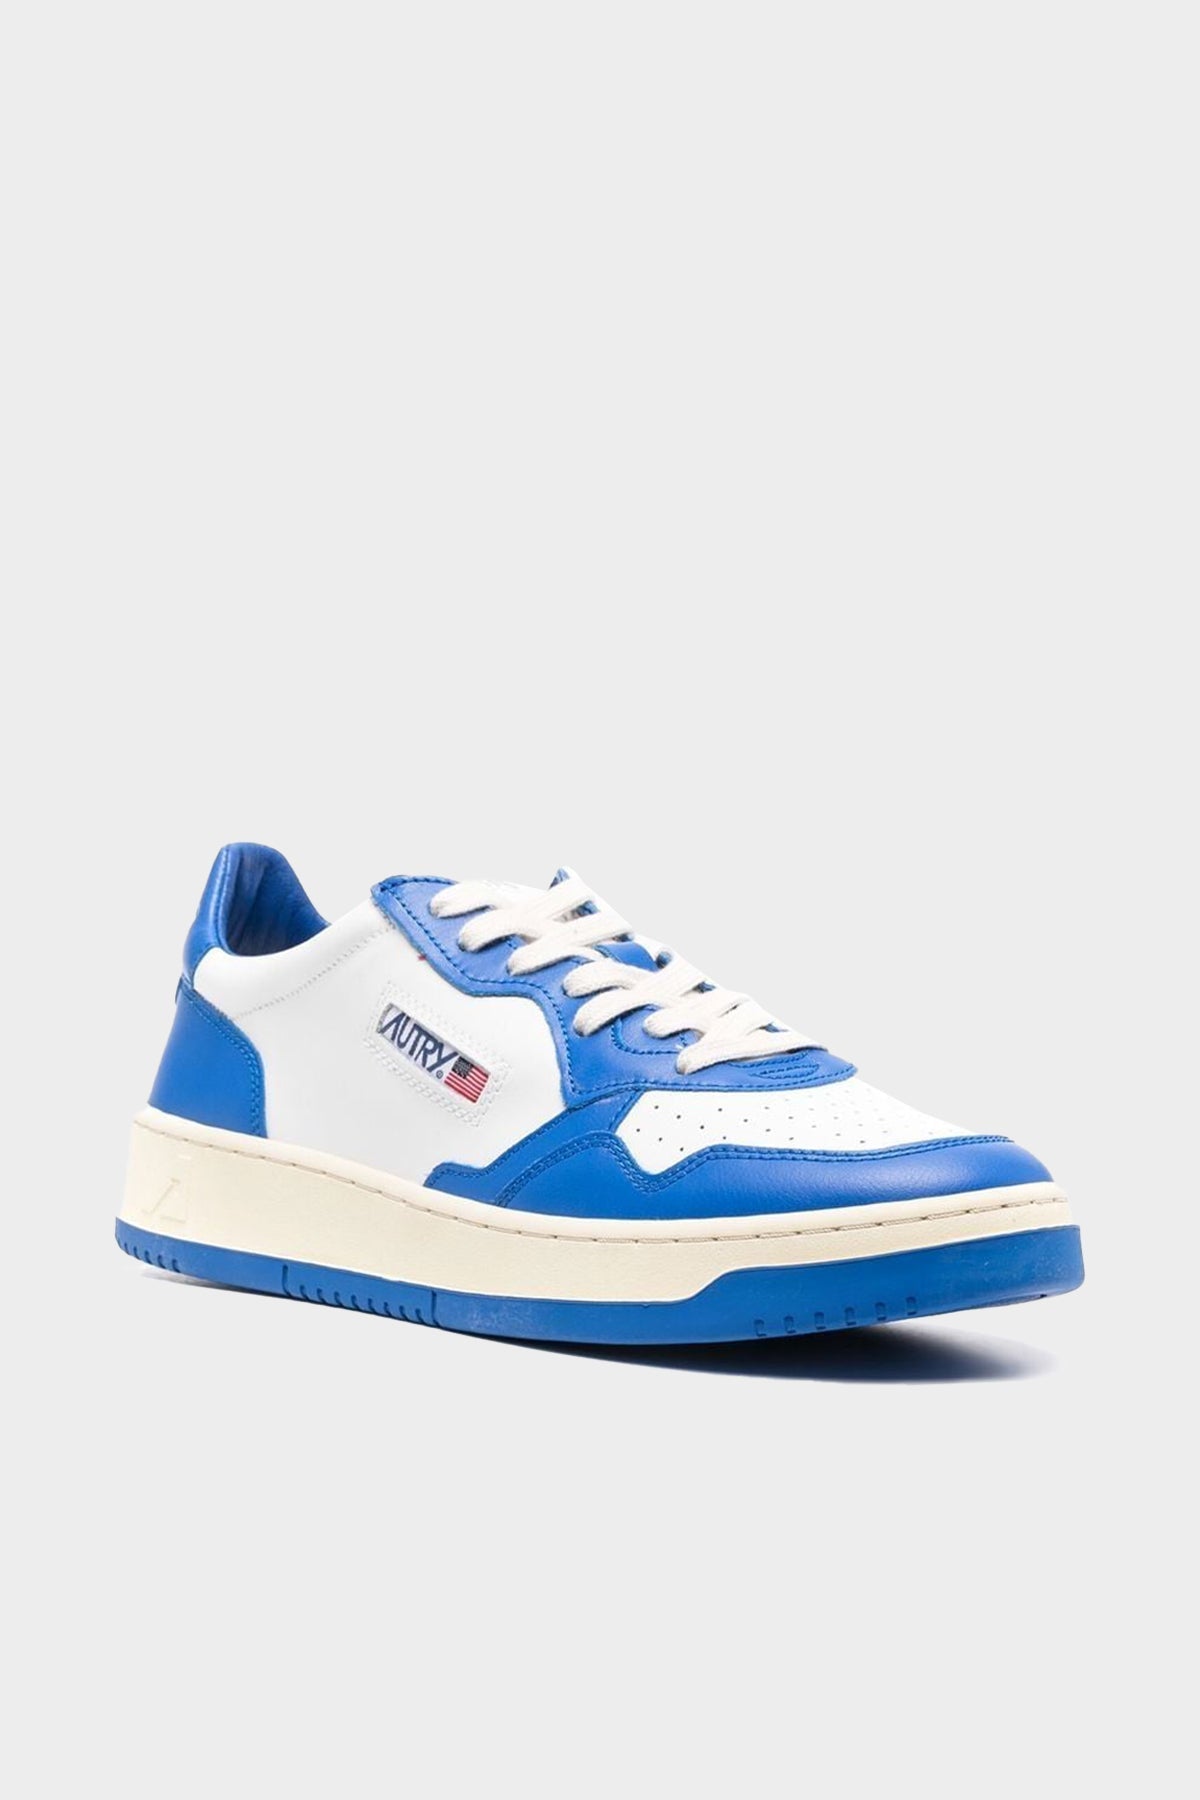 Two-Tone Medalist Low Leather Men Sneaker in White and Prince Blue - shop-olivia.com